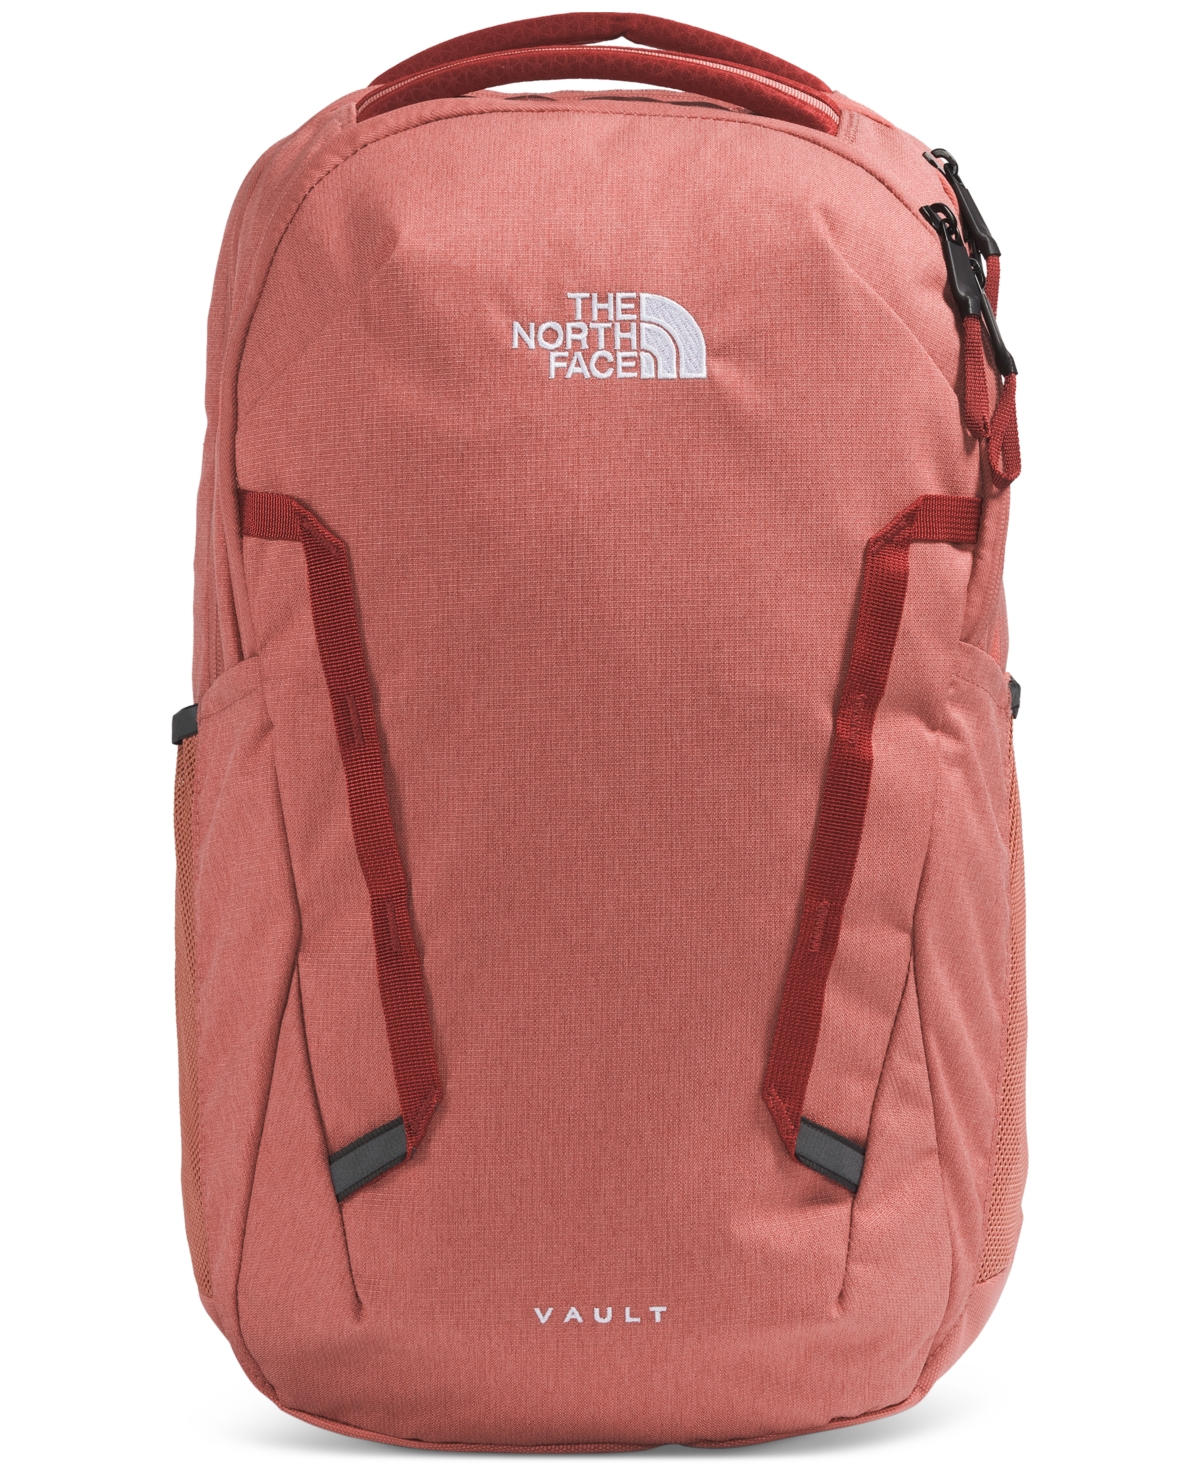 Shop The North Face Women's Vault Backpack In Light Mahogany Dark Heather,iron Red,tnf